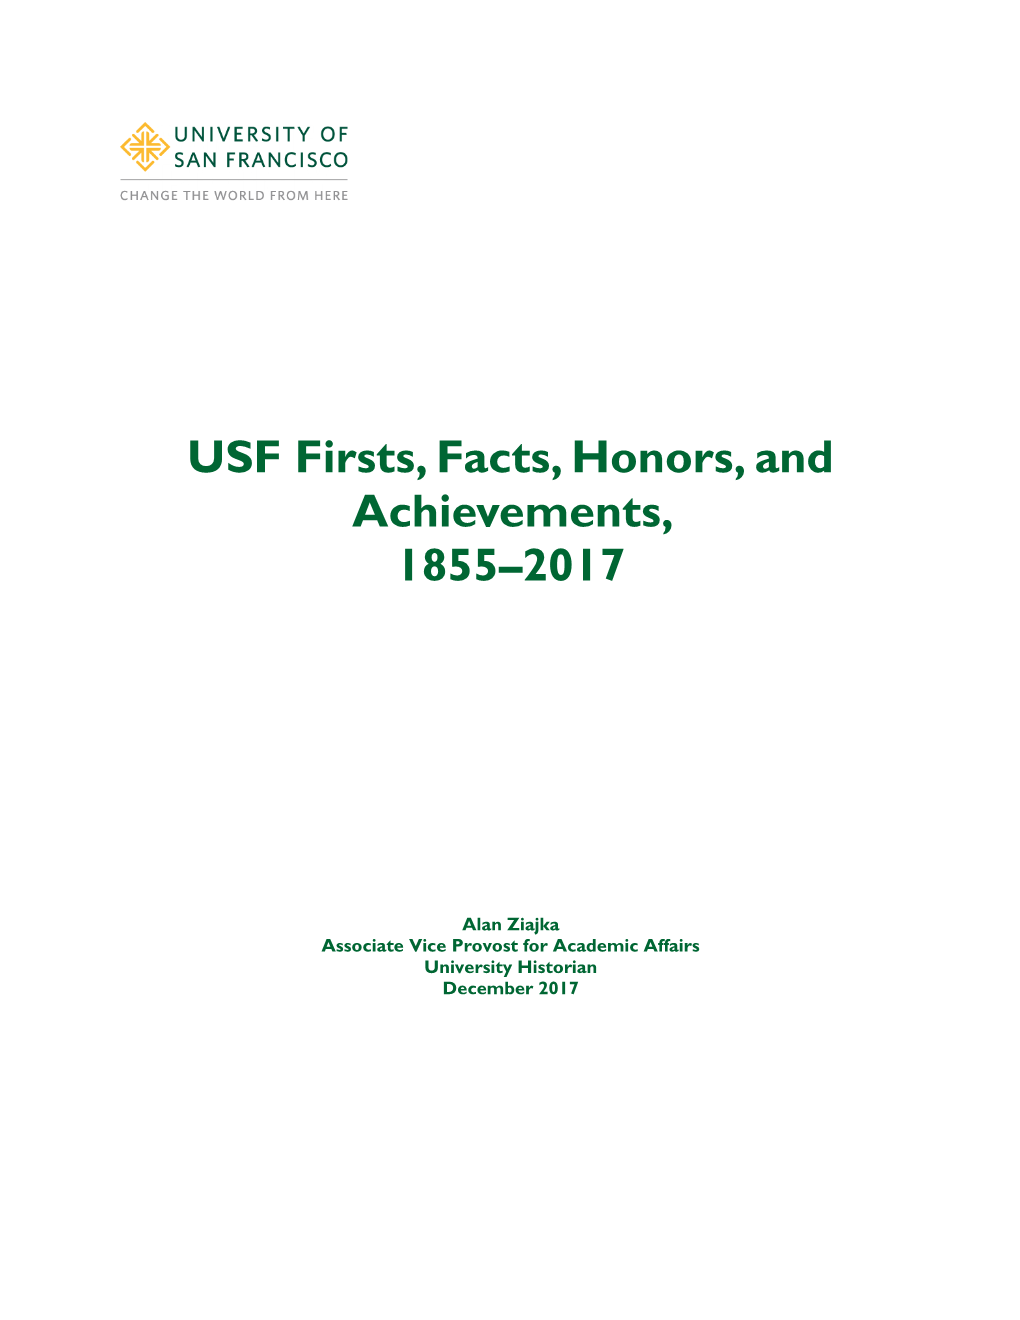 USF Firsts, Facts, Honors, and Achievements